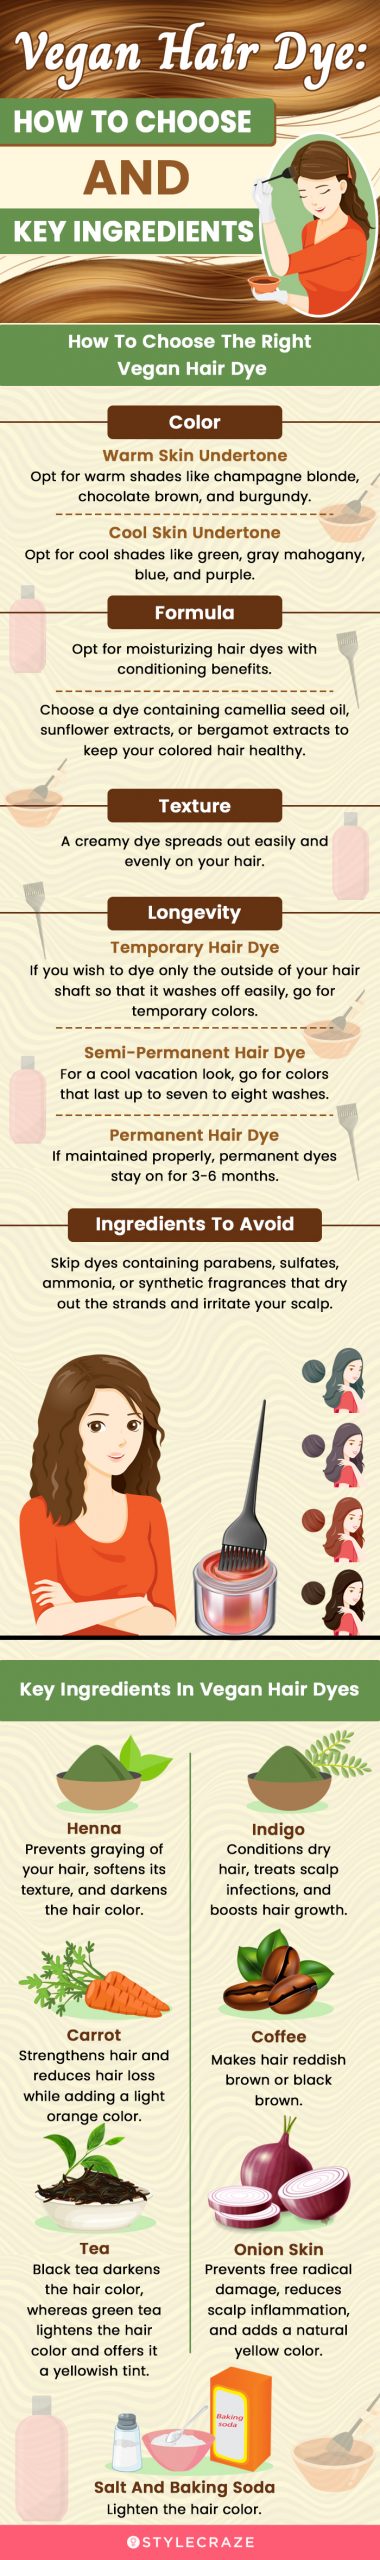 Vegan Hair Dye: How To Choose And Key Ingredients (infographic)